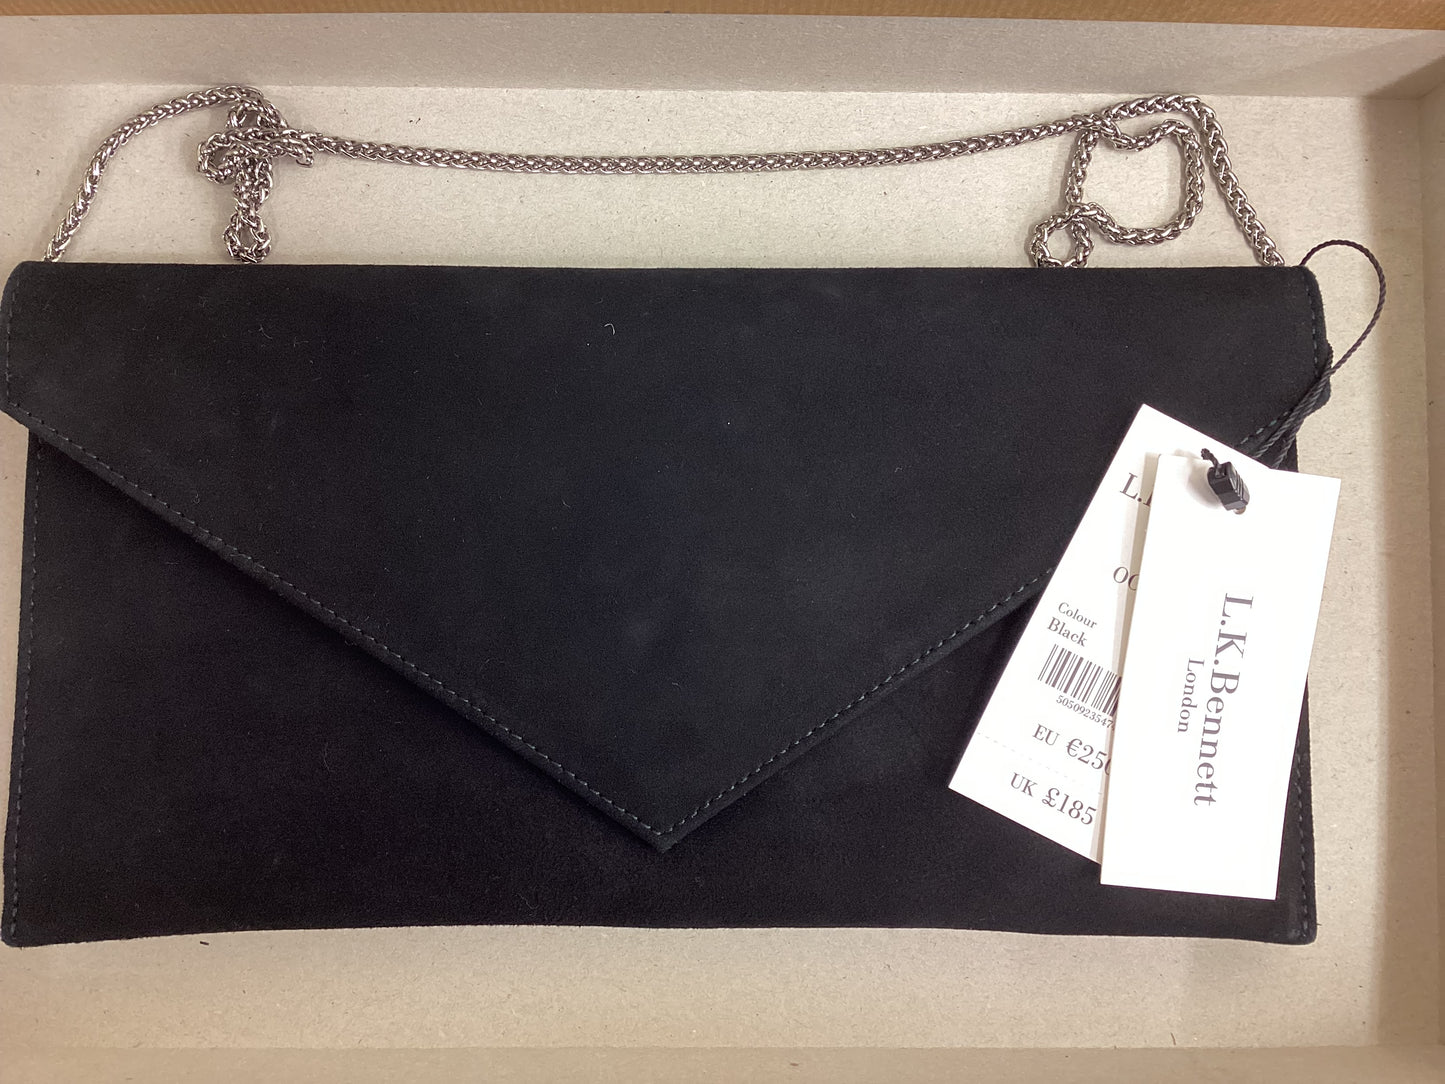 Clutch bag with chain by LK Bennett